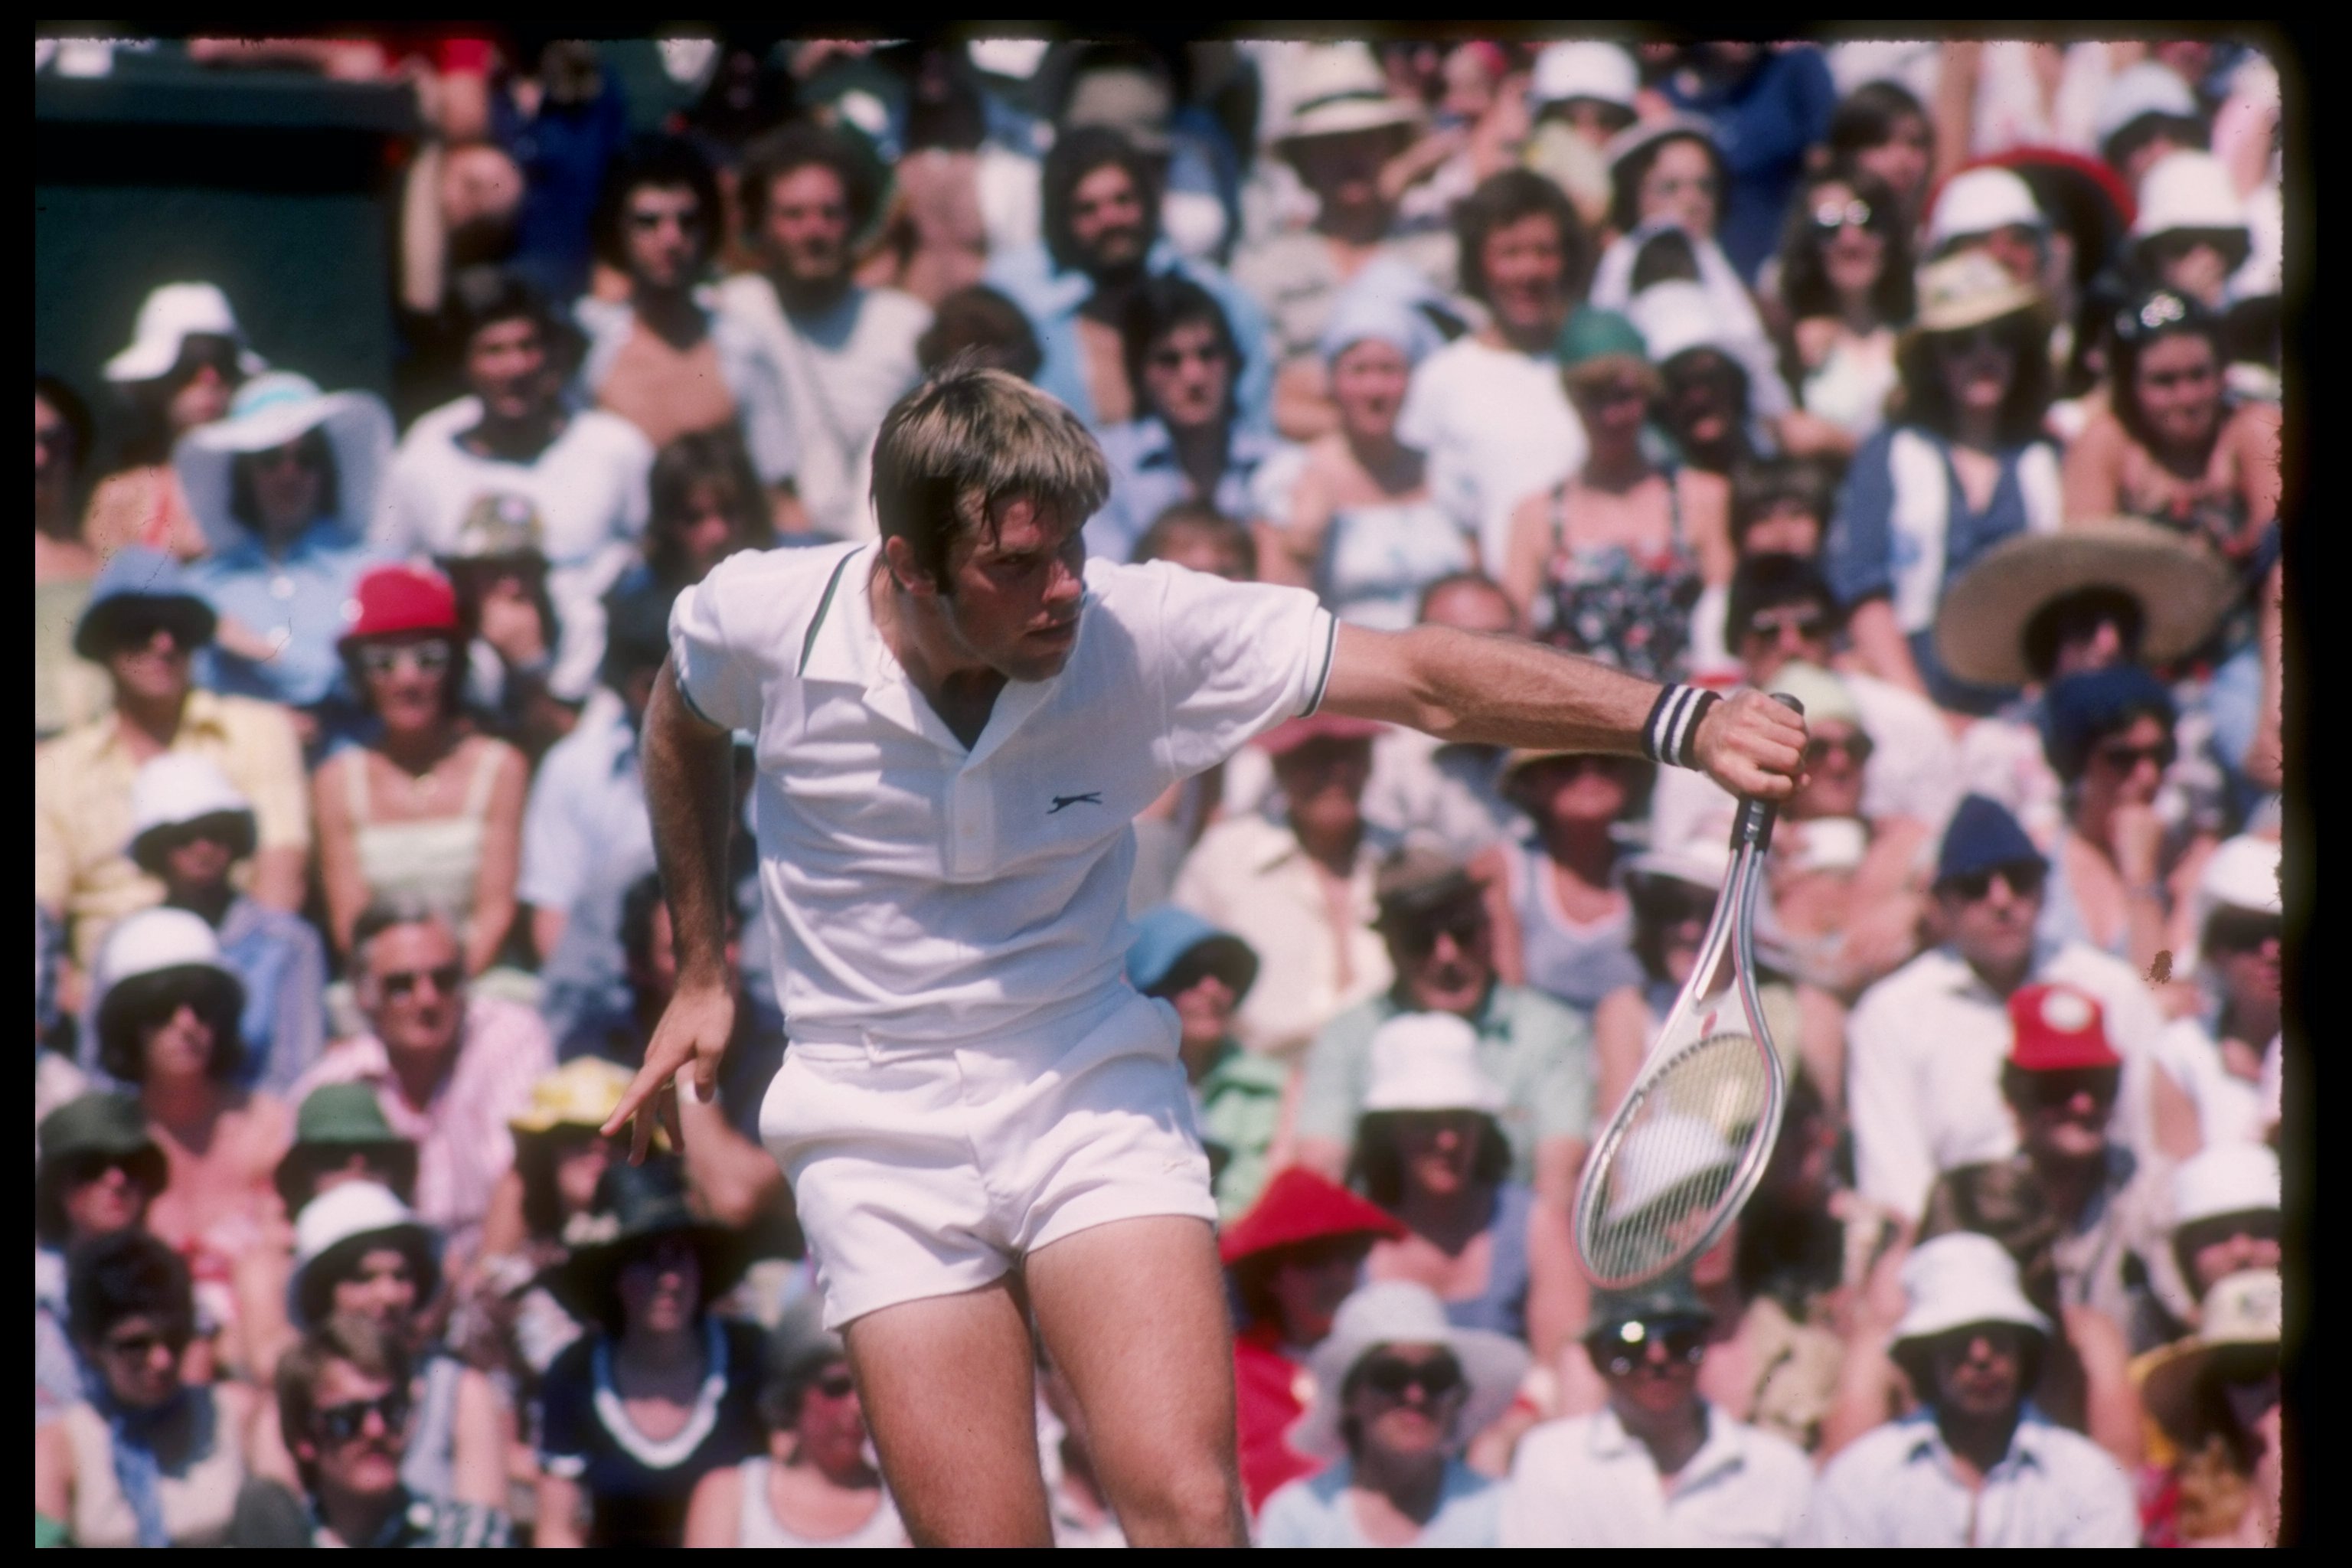 Roscoe Tanner in action on the court during Wimbledon in London, England.